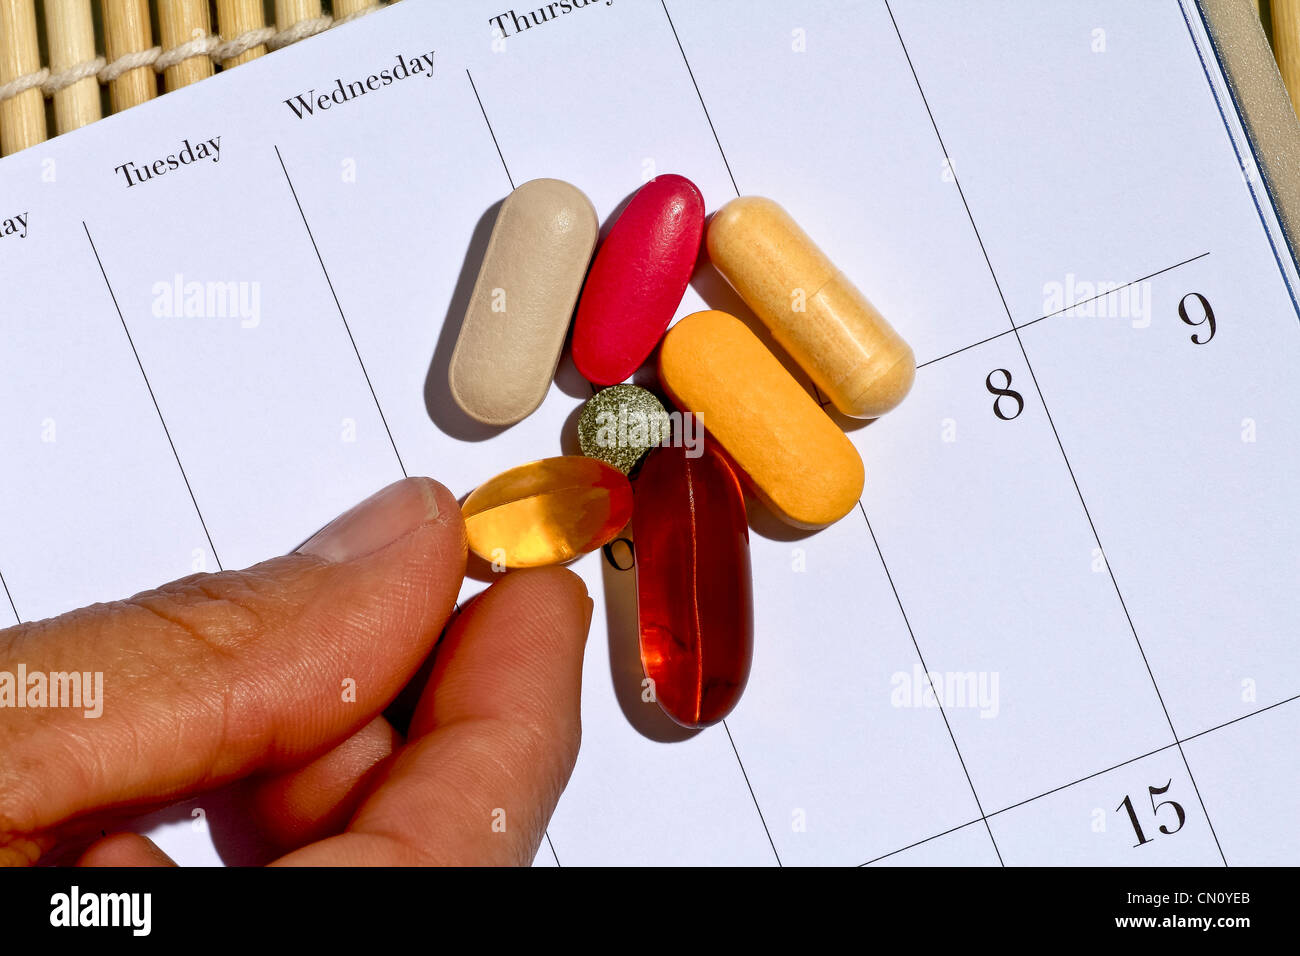 Vitamins and minerals on calendar with fingers reaching to pick one up Stock Photo